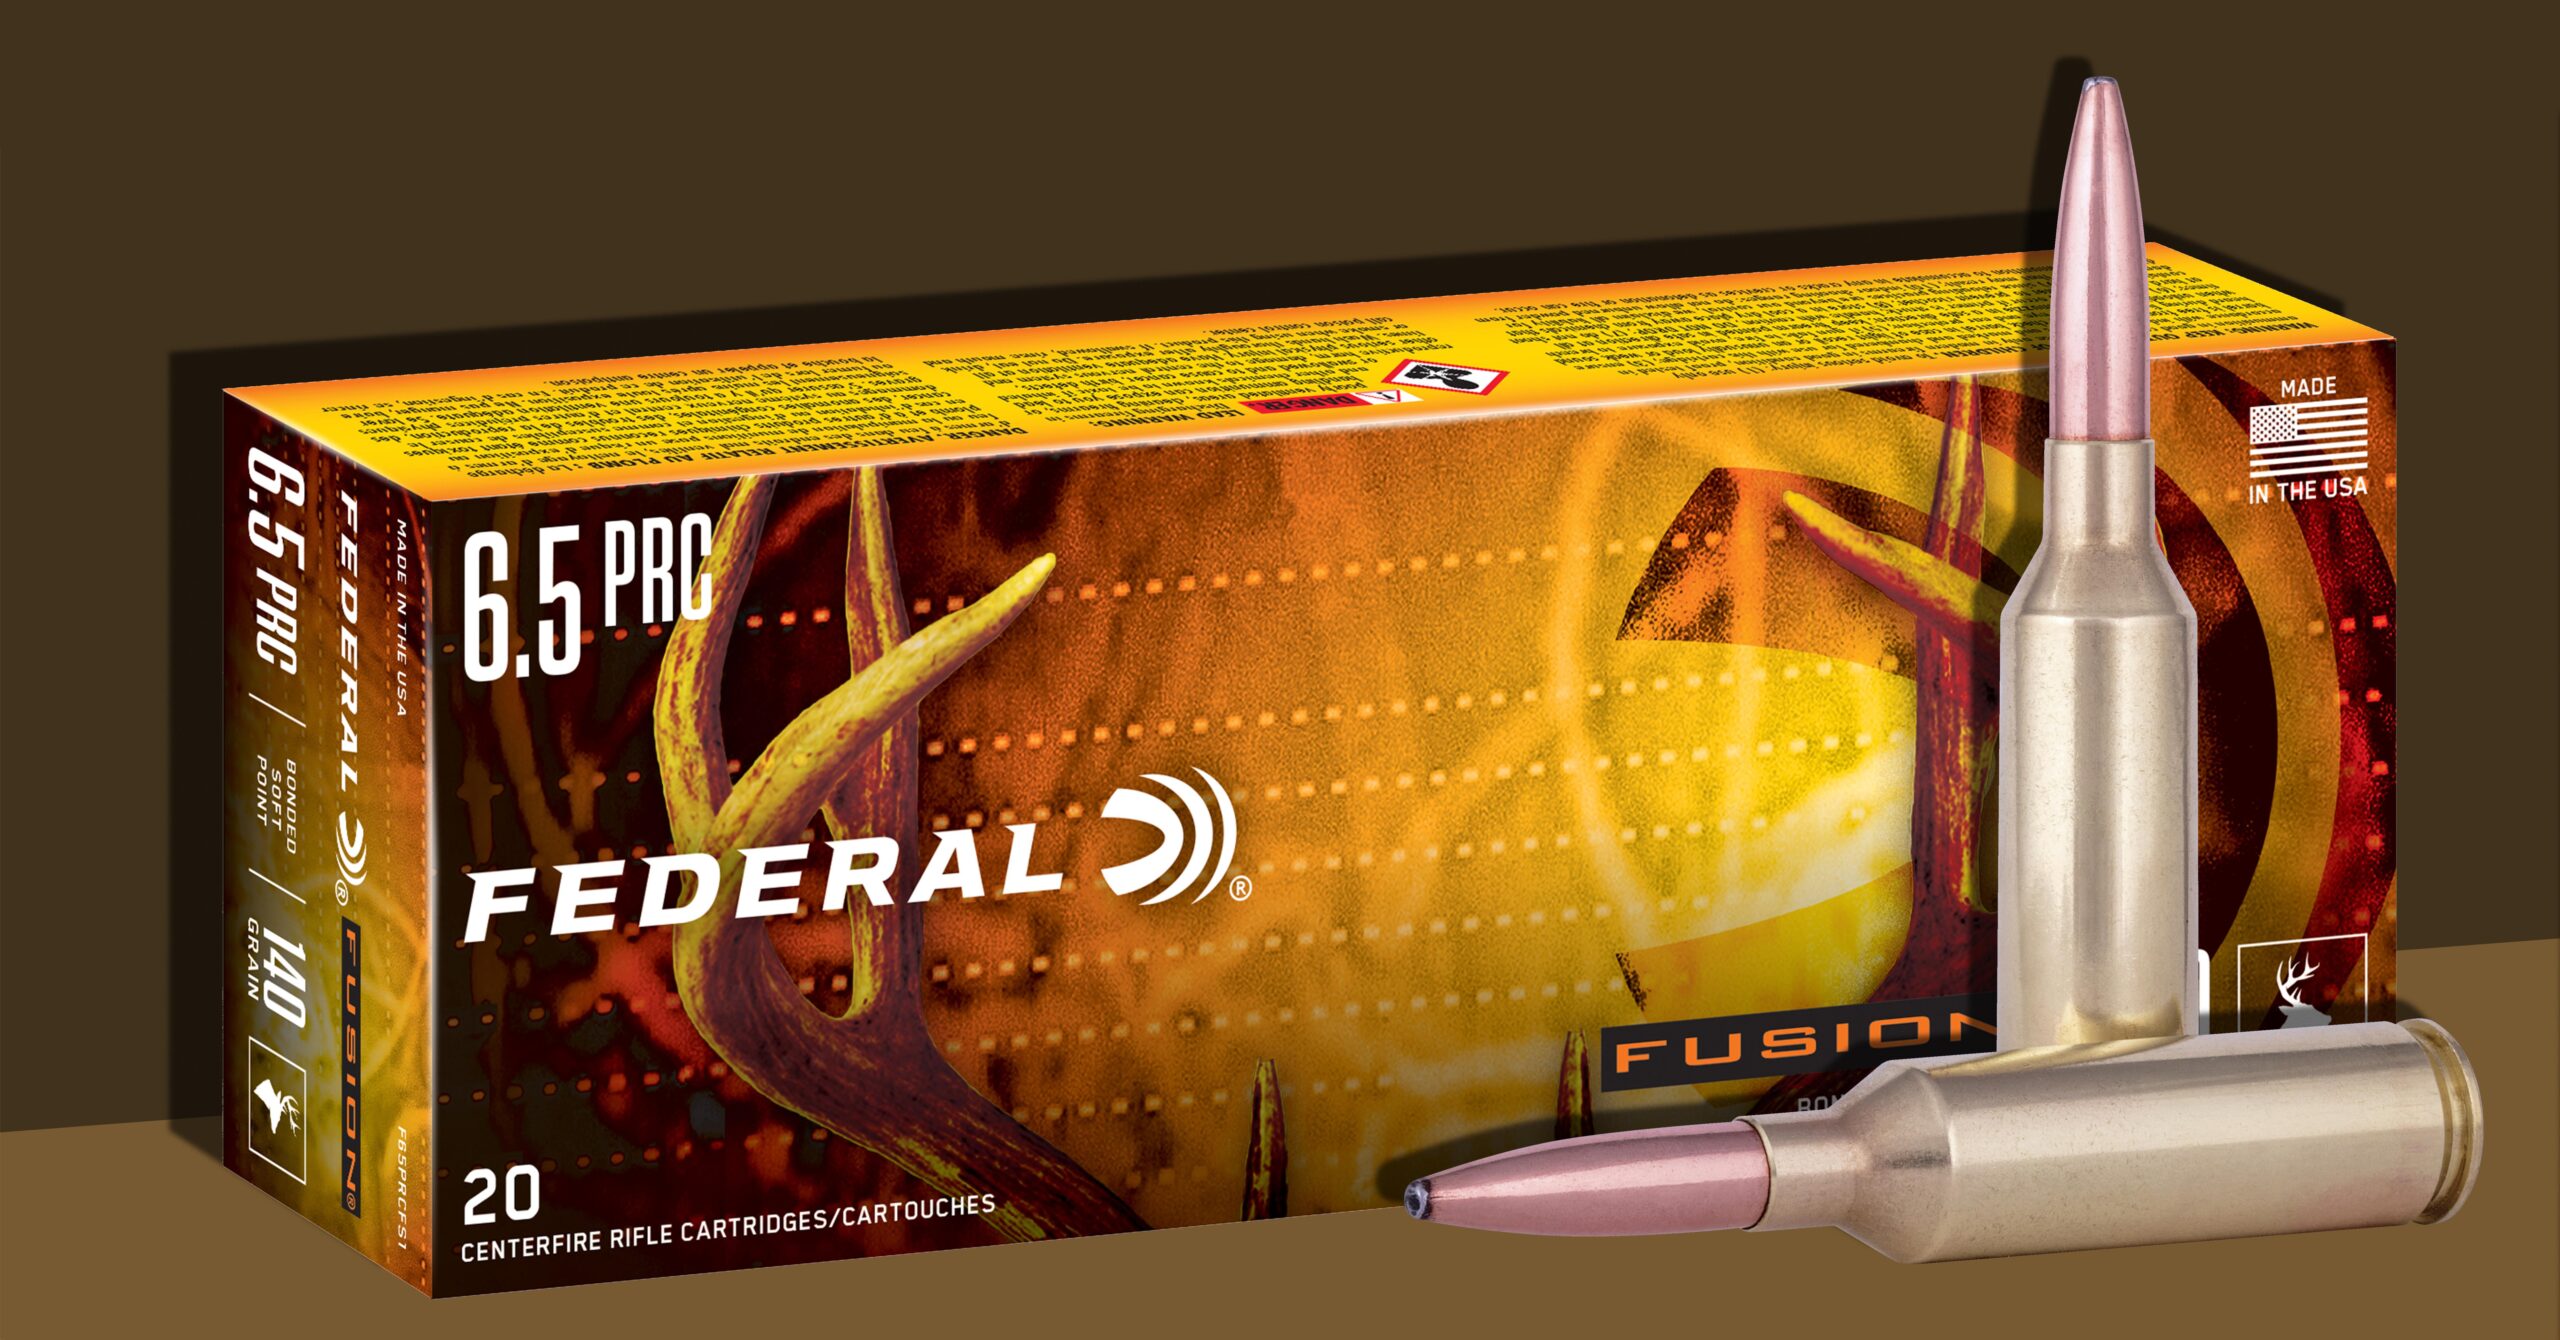 Federal Fusion big game rifle ammunition in the 6.5 PRC cartridge.